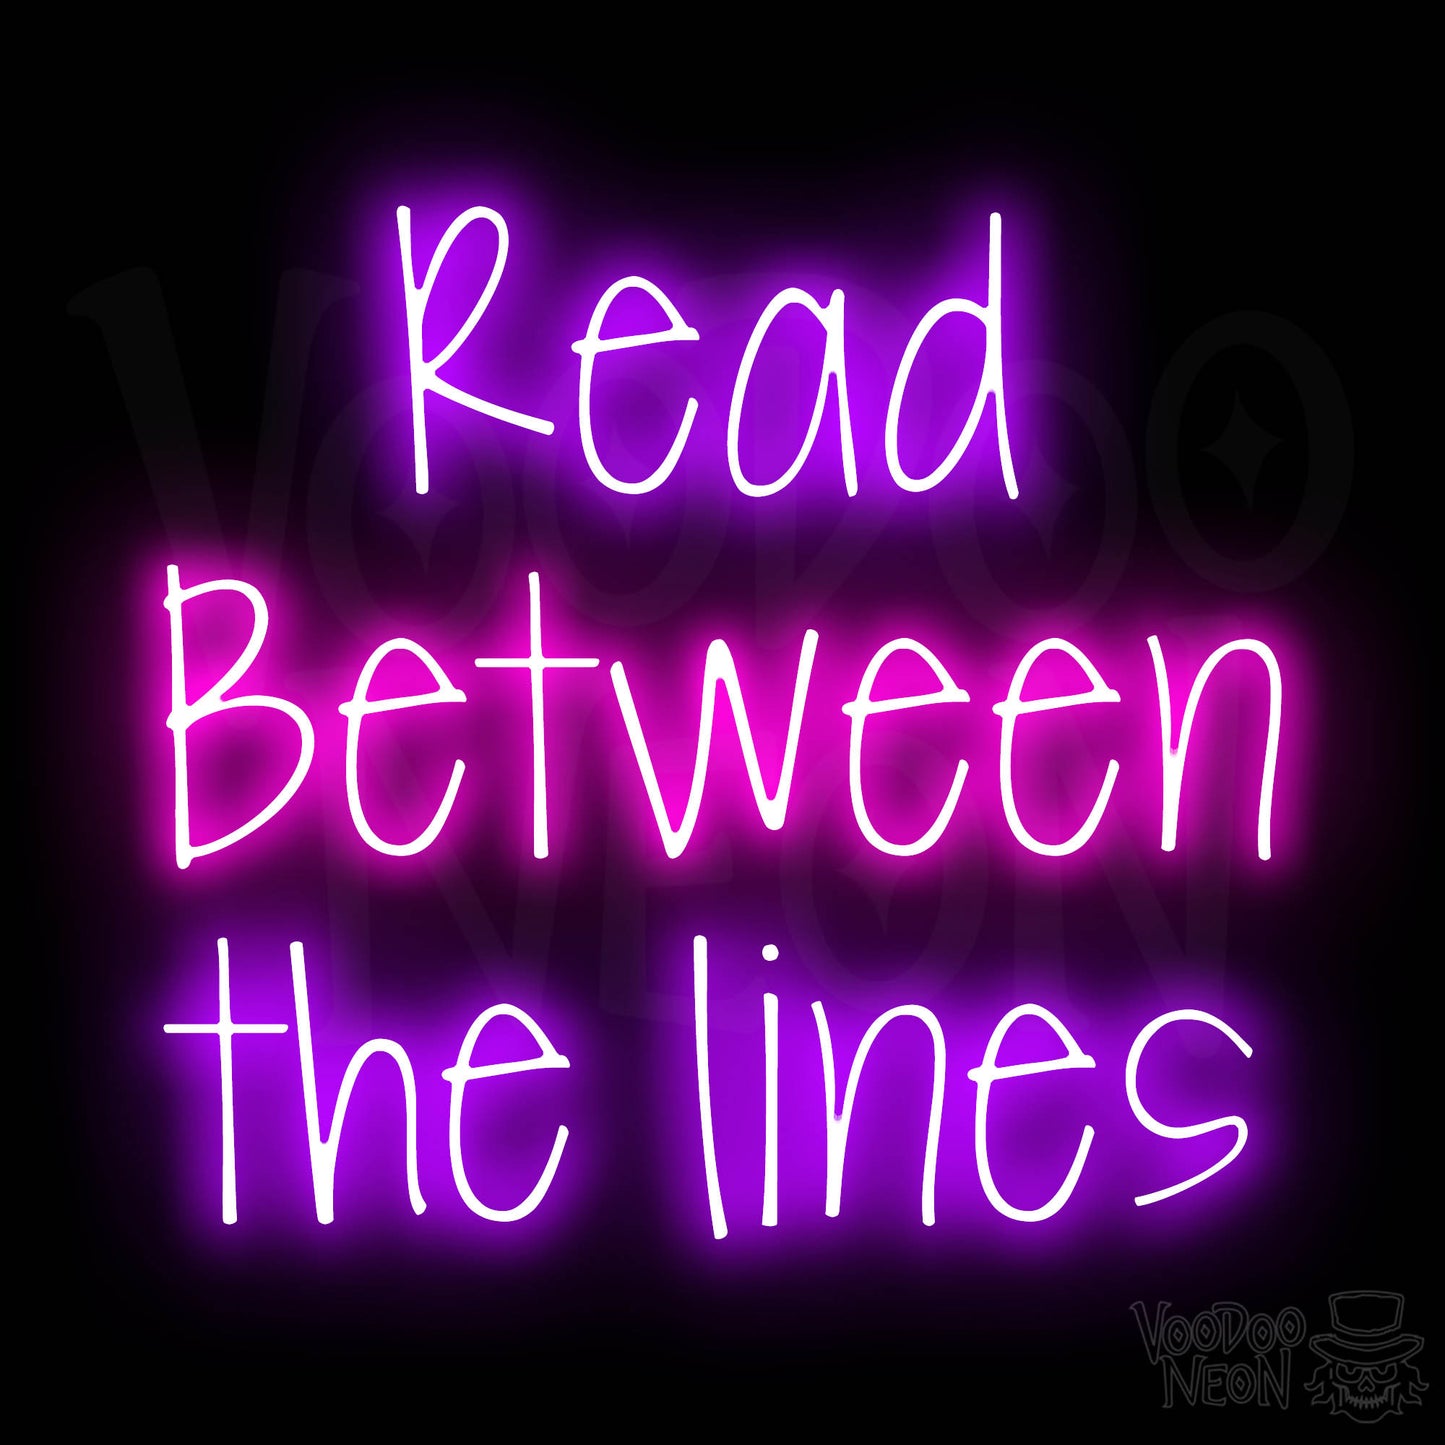 Read Between The Lines LED Neon - Multi-Color